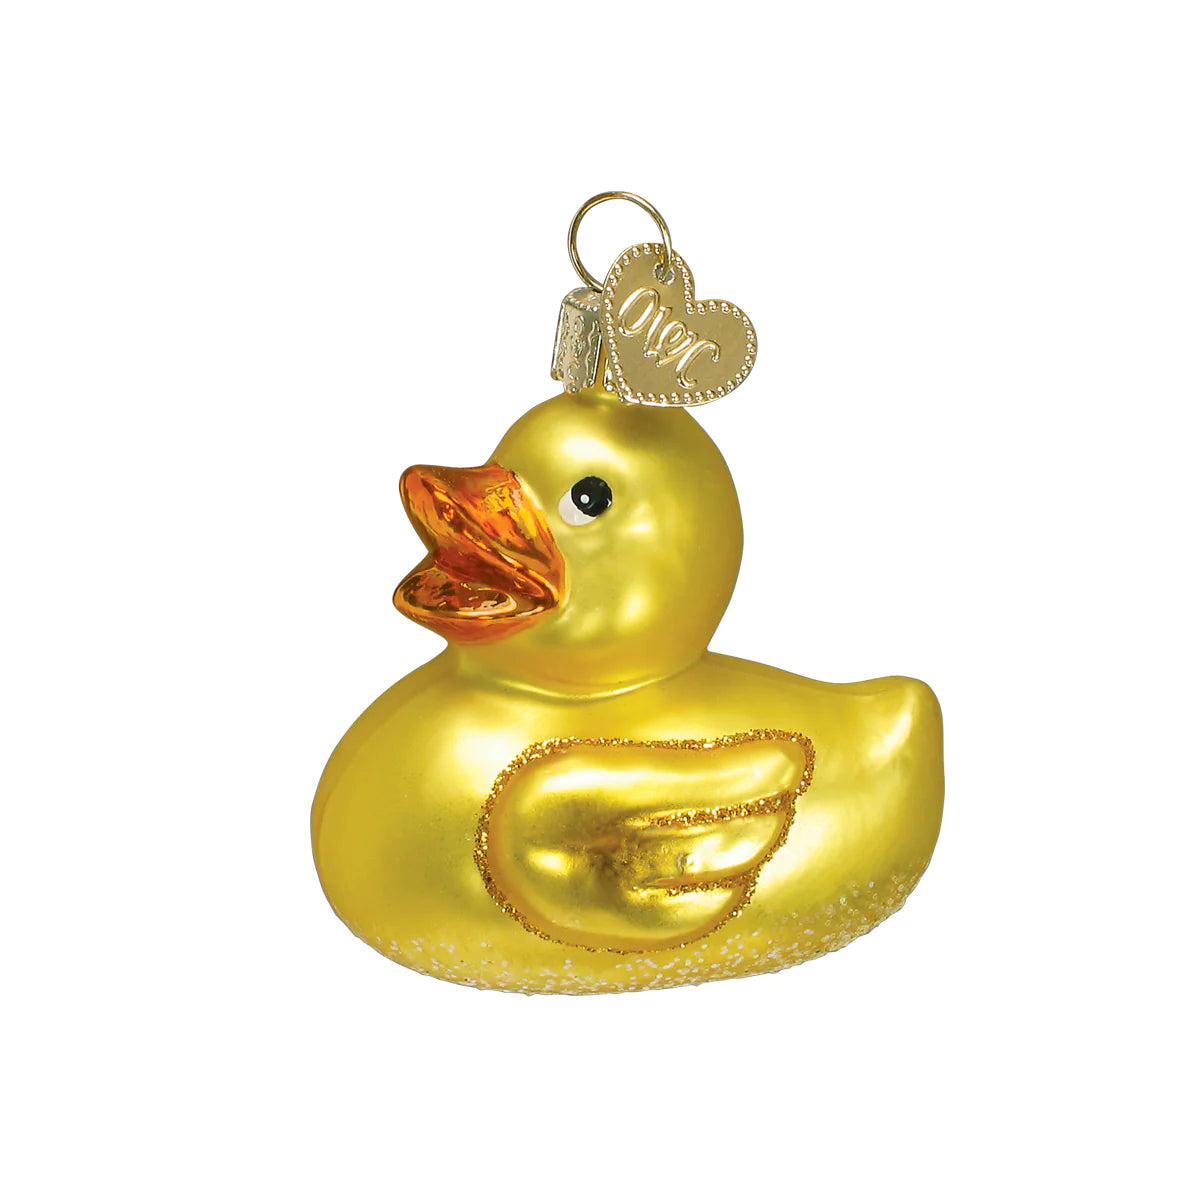 Rubber Ducky Ornament  Old World Christmas   